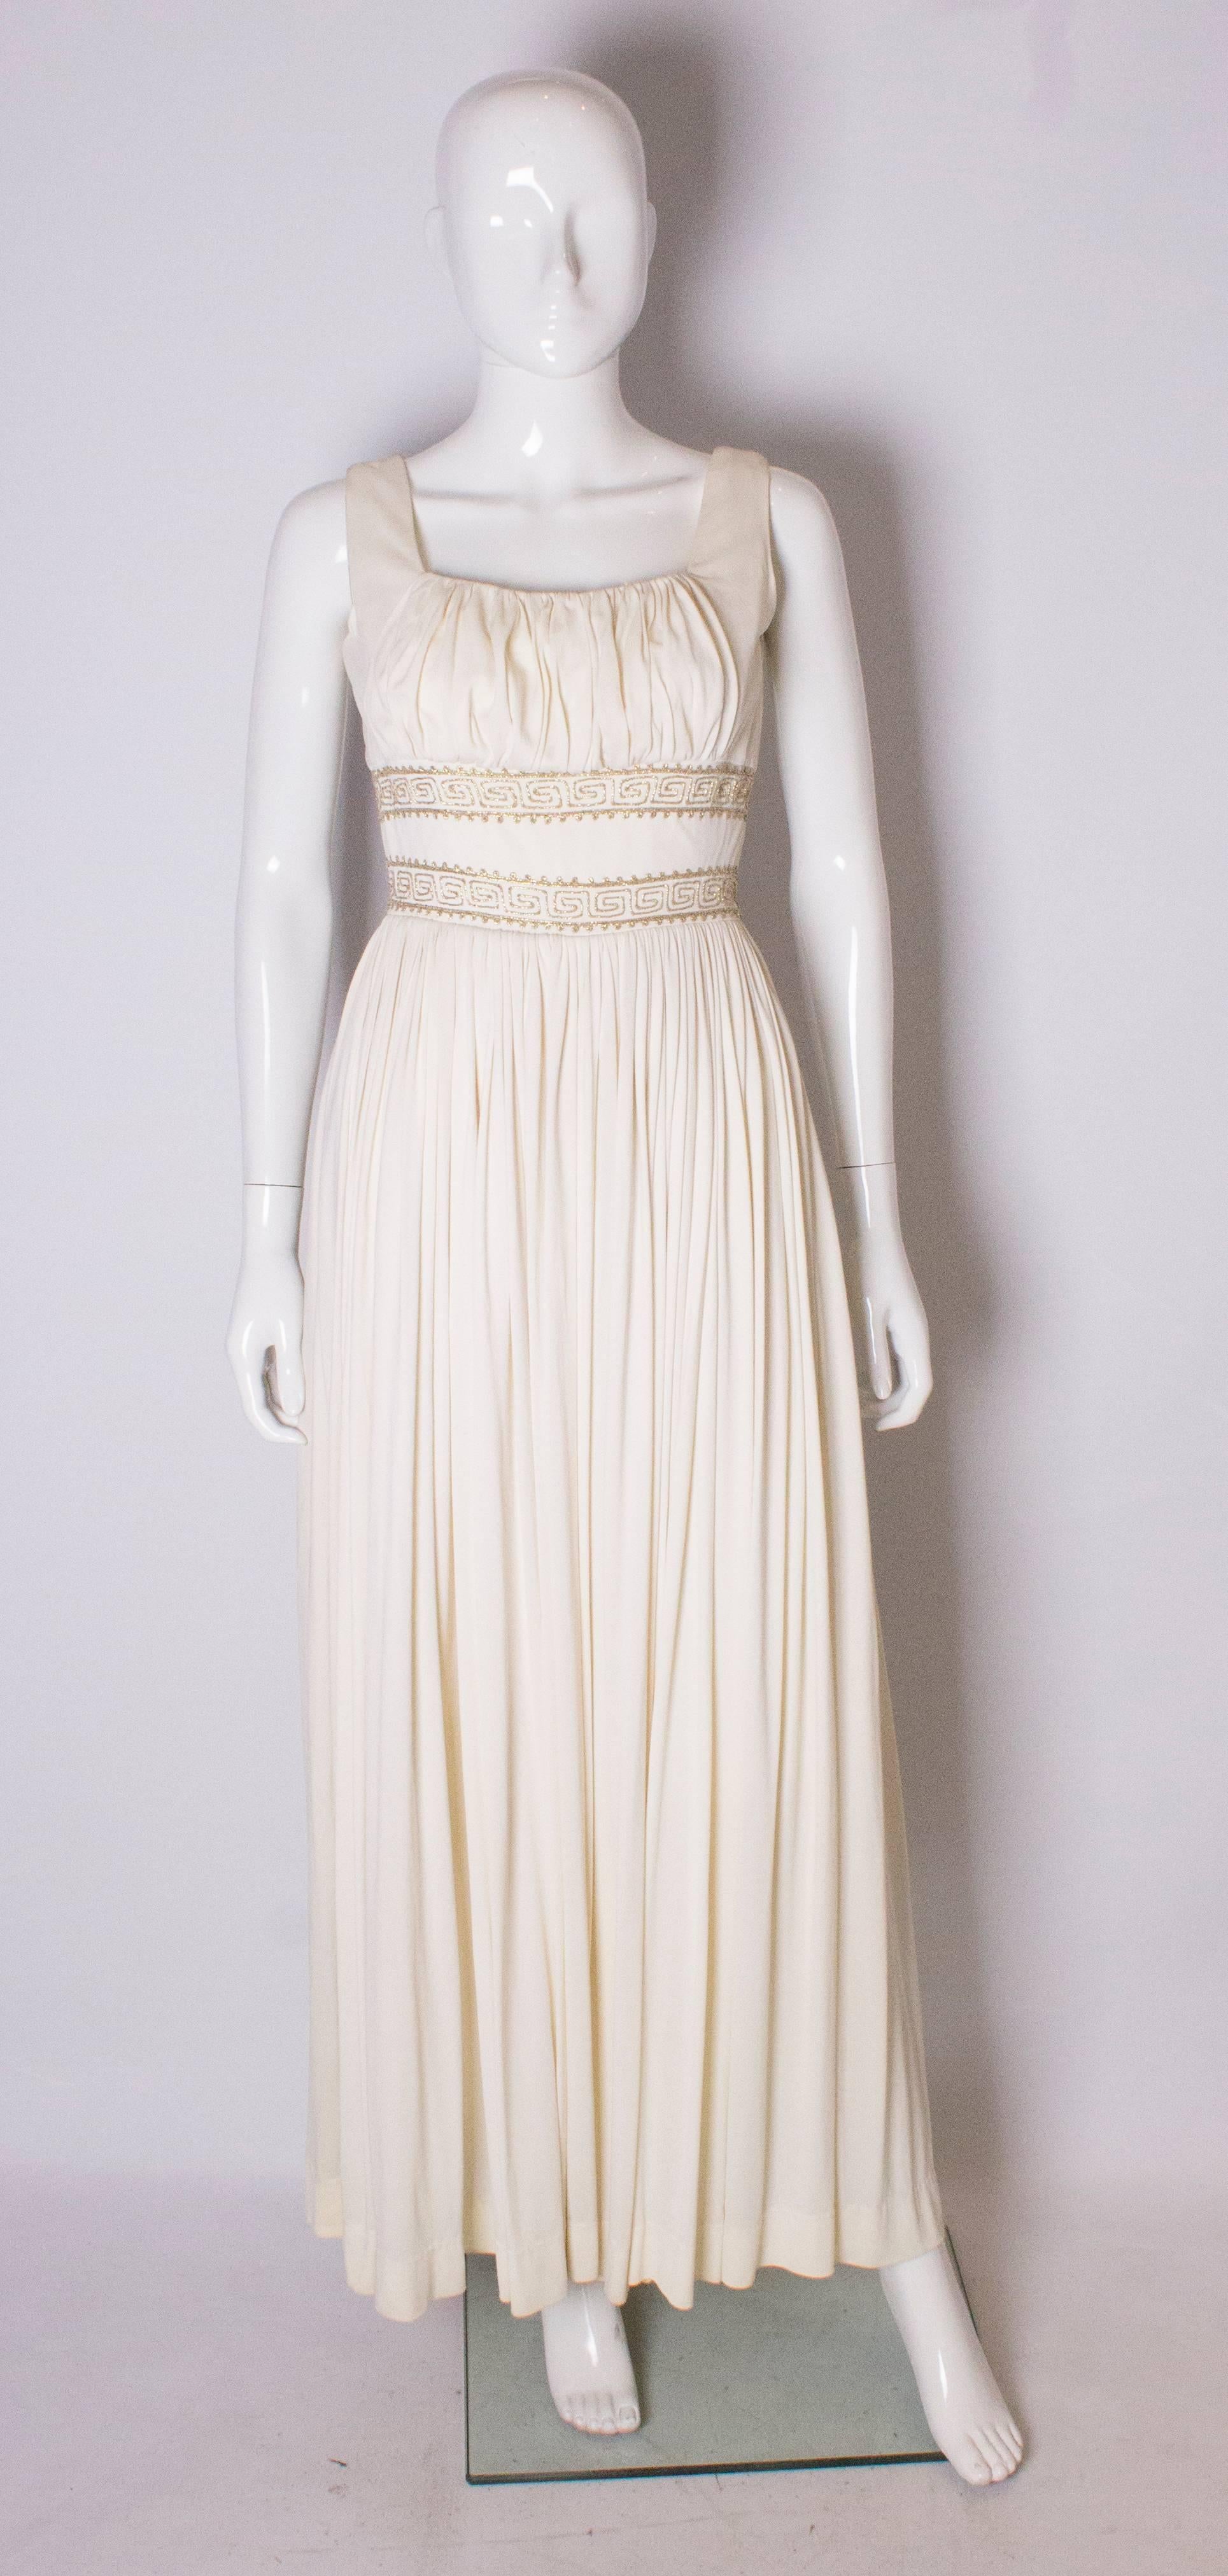 A chic white Grecian style evening gown. The dress has a scoop neckline with gathering over the bust with two rows of gold braiding under the bust,and a full skirt. The dress has a central back zip, and is fuly lined.